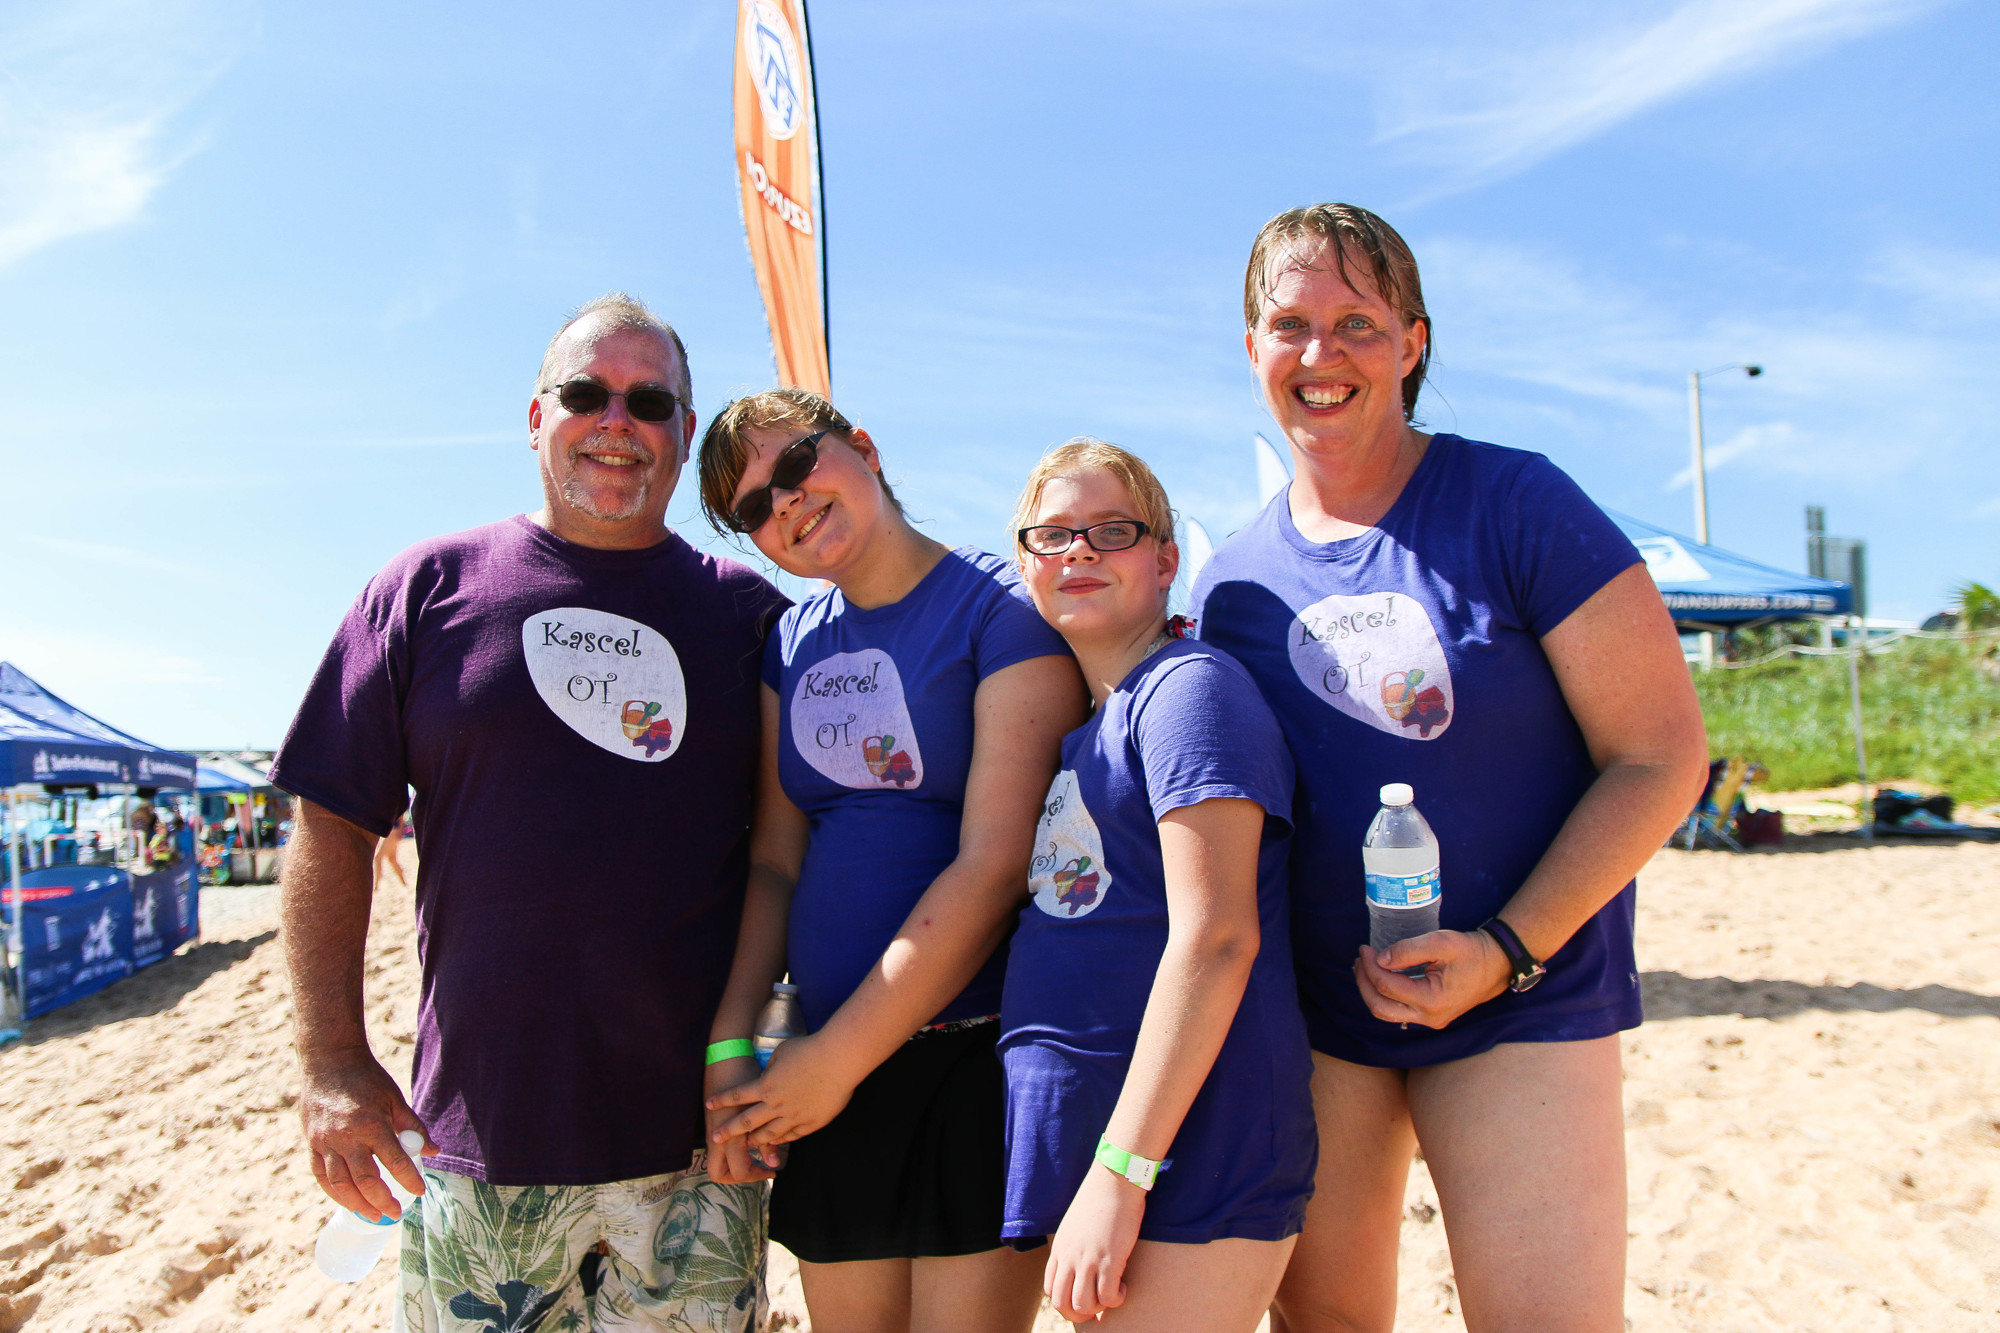 Kevin, Celeste, Kassandra and Jennifer Baker volunteer at the Surfers for Autism event. Photo by Paige Wilson